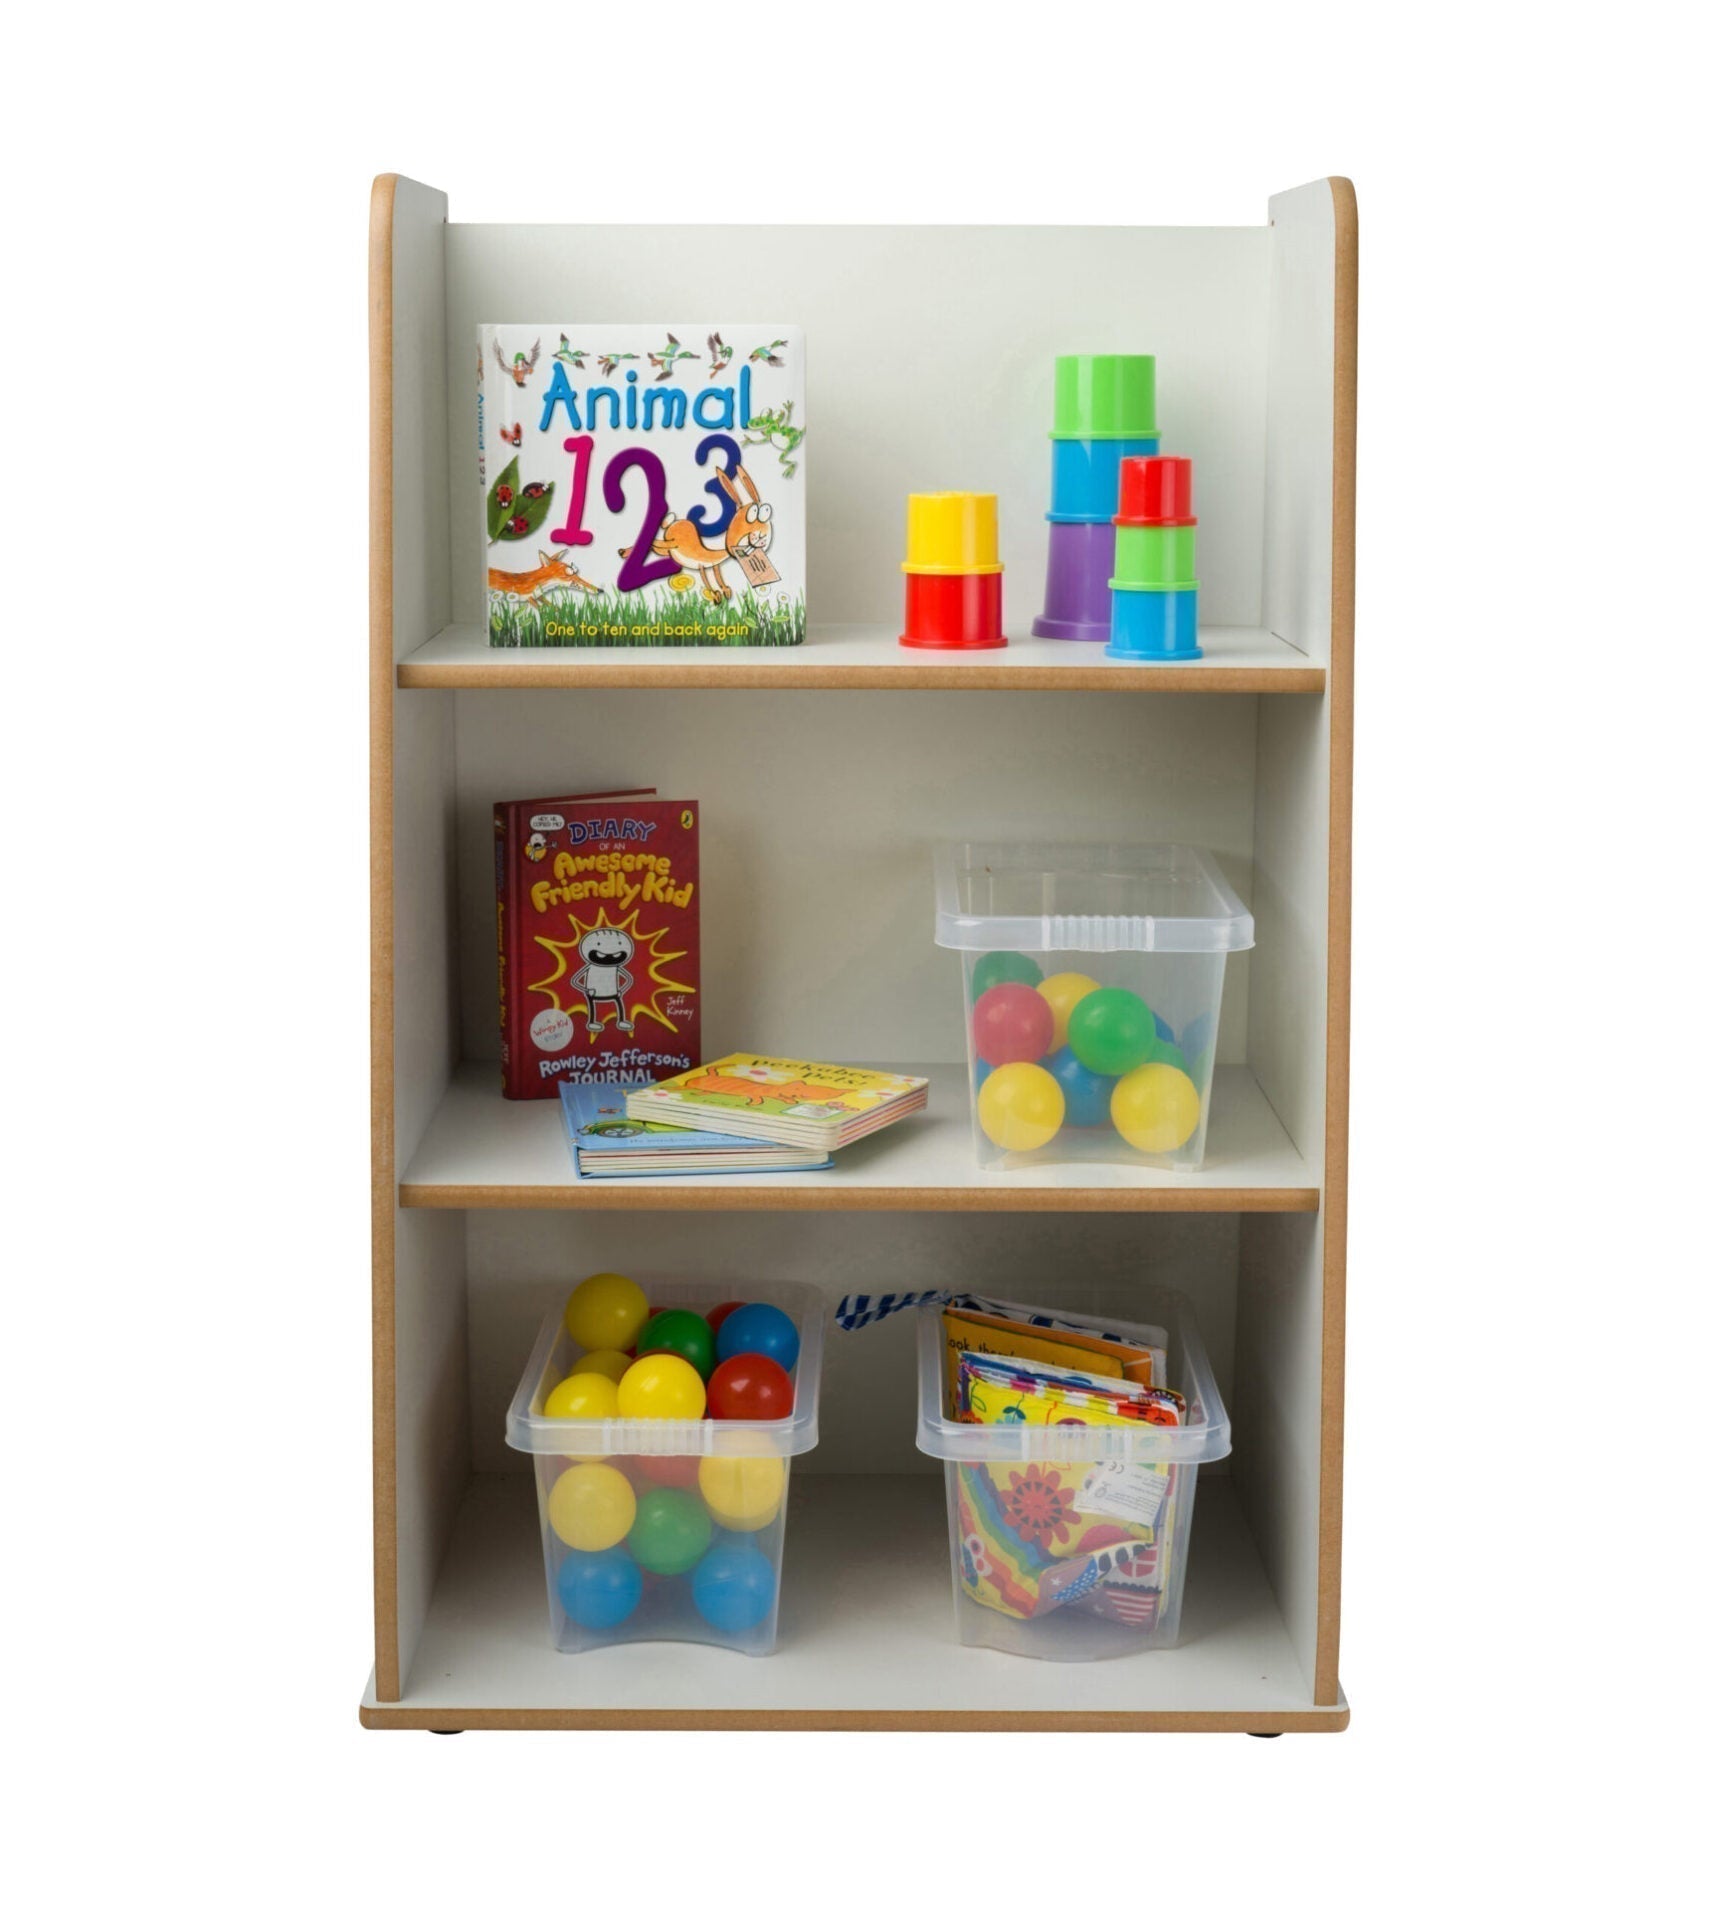 Free Standing Compact Shelf, The Free Standing Compact Shelf is an anti-topple compact shelf unit which is designed to be easily accessible and simple, yet sturdy. The Free Standing Compact Shelf is great for maximising storage and displaying items. The Free Standing Compact Shelf can be used alone or alongside other units in the range. The Free Standing Compact Shelf is a well-thought-out storage solution specifically tailored for educational environments, including schools and Early Years Foundation Stage